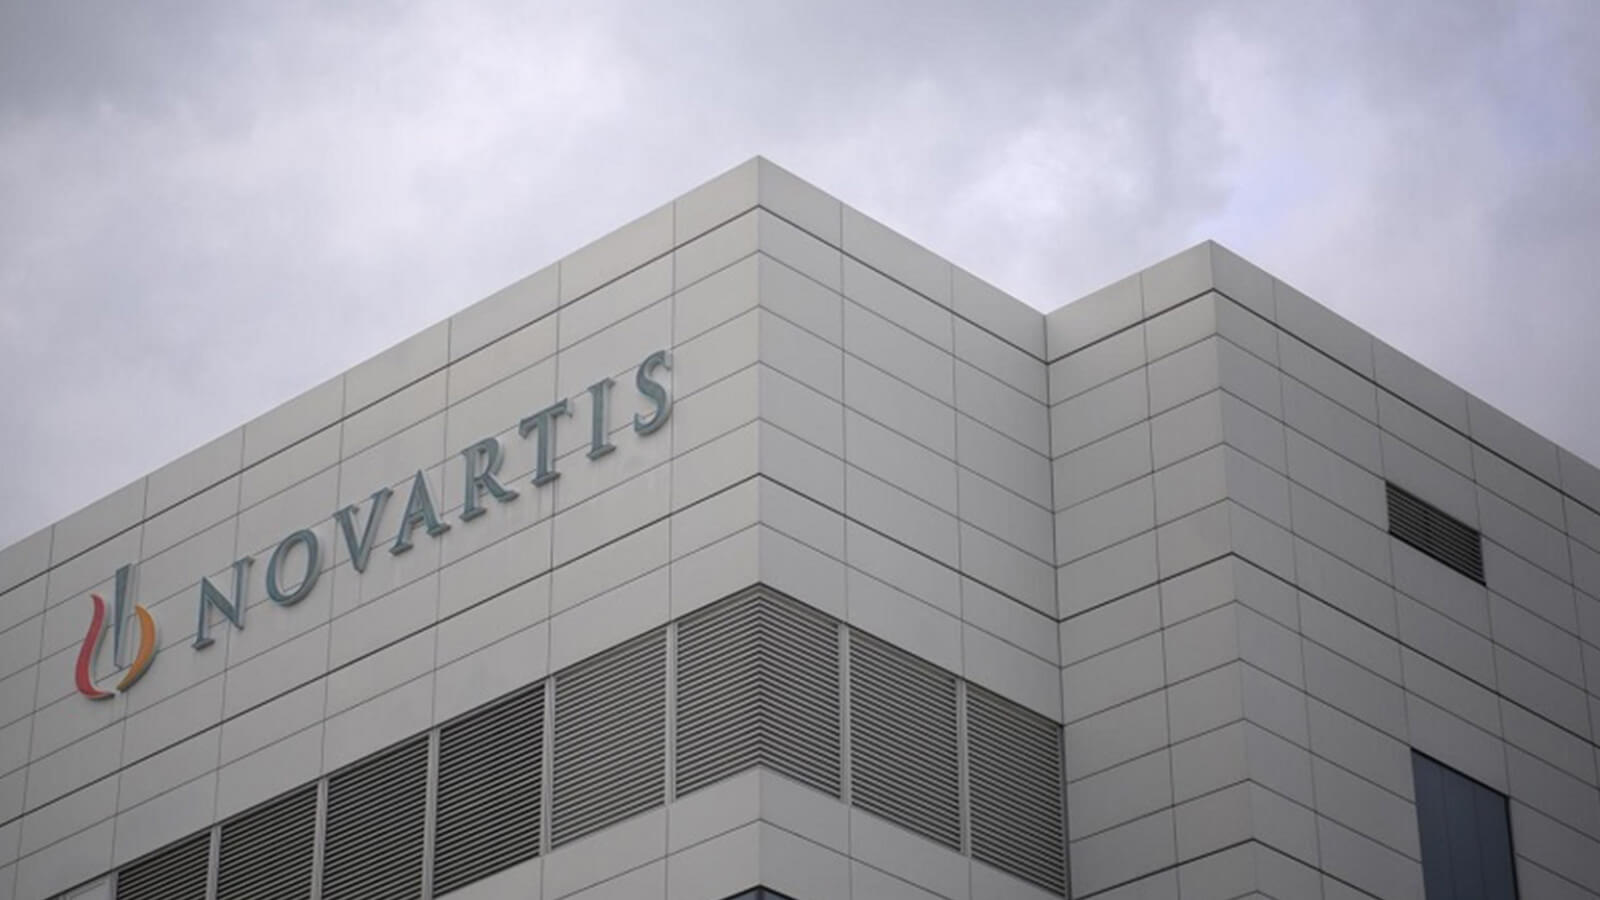 Novartis has worked with Workforce Singapore and local universities to train workers. ST PHOTO: MARK CHEONG